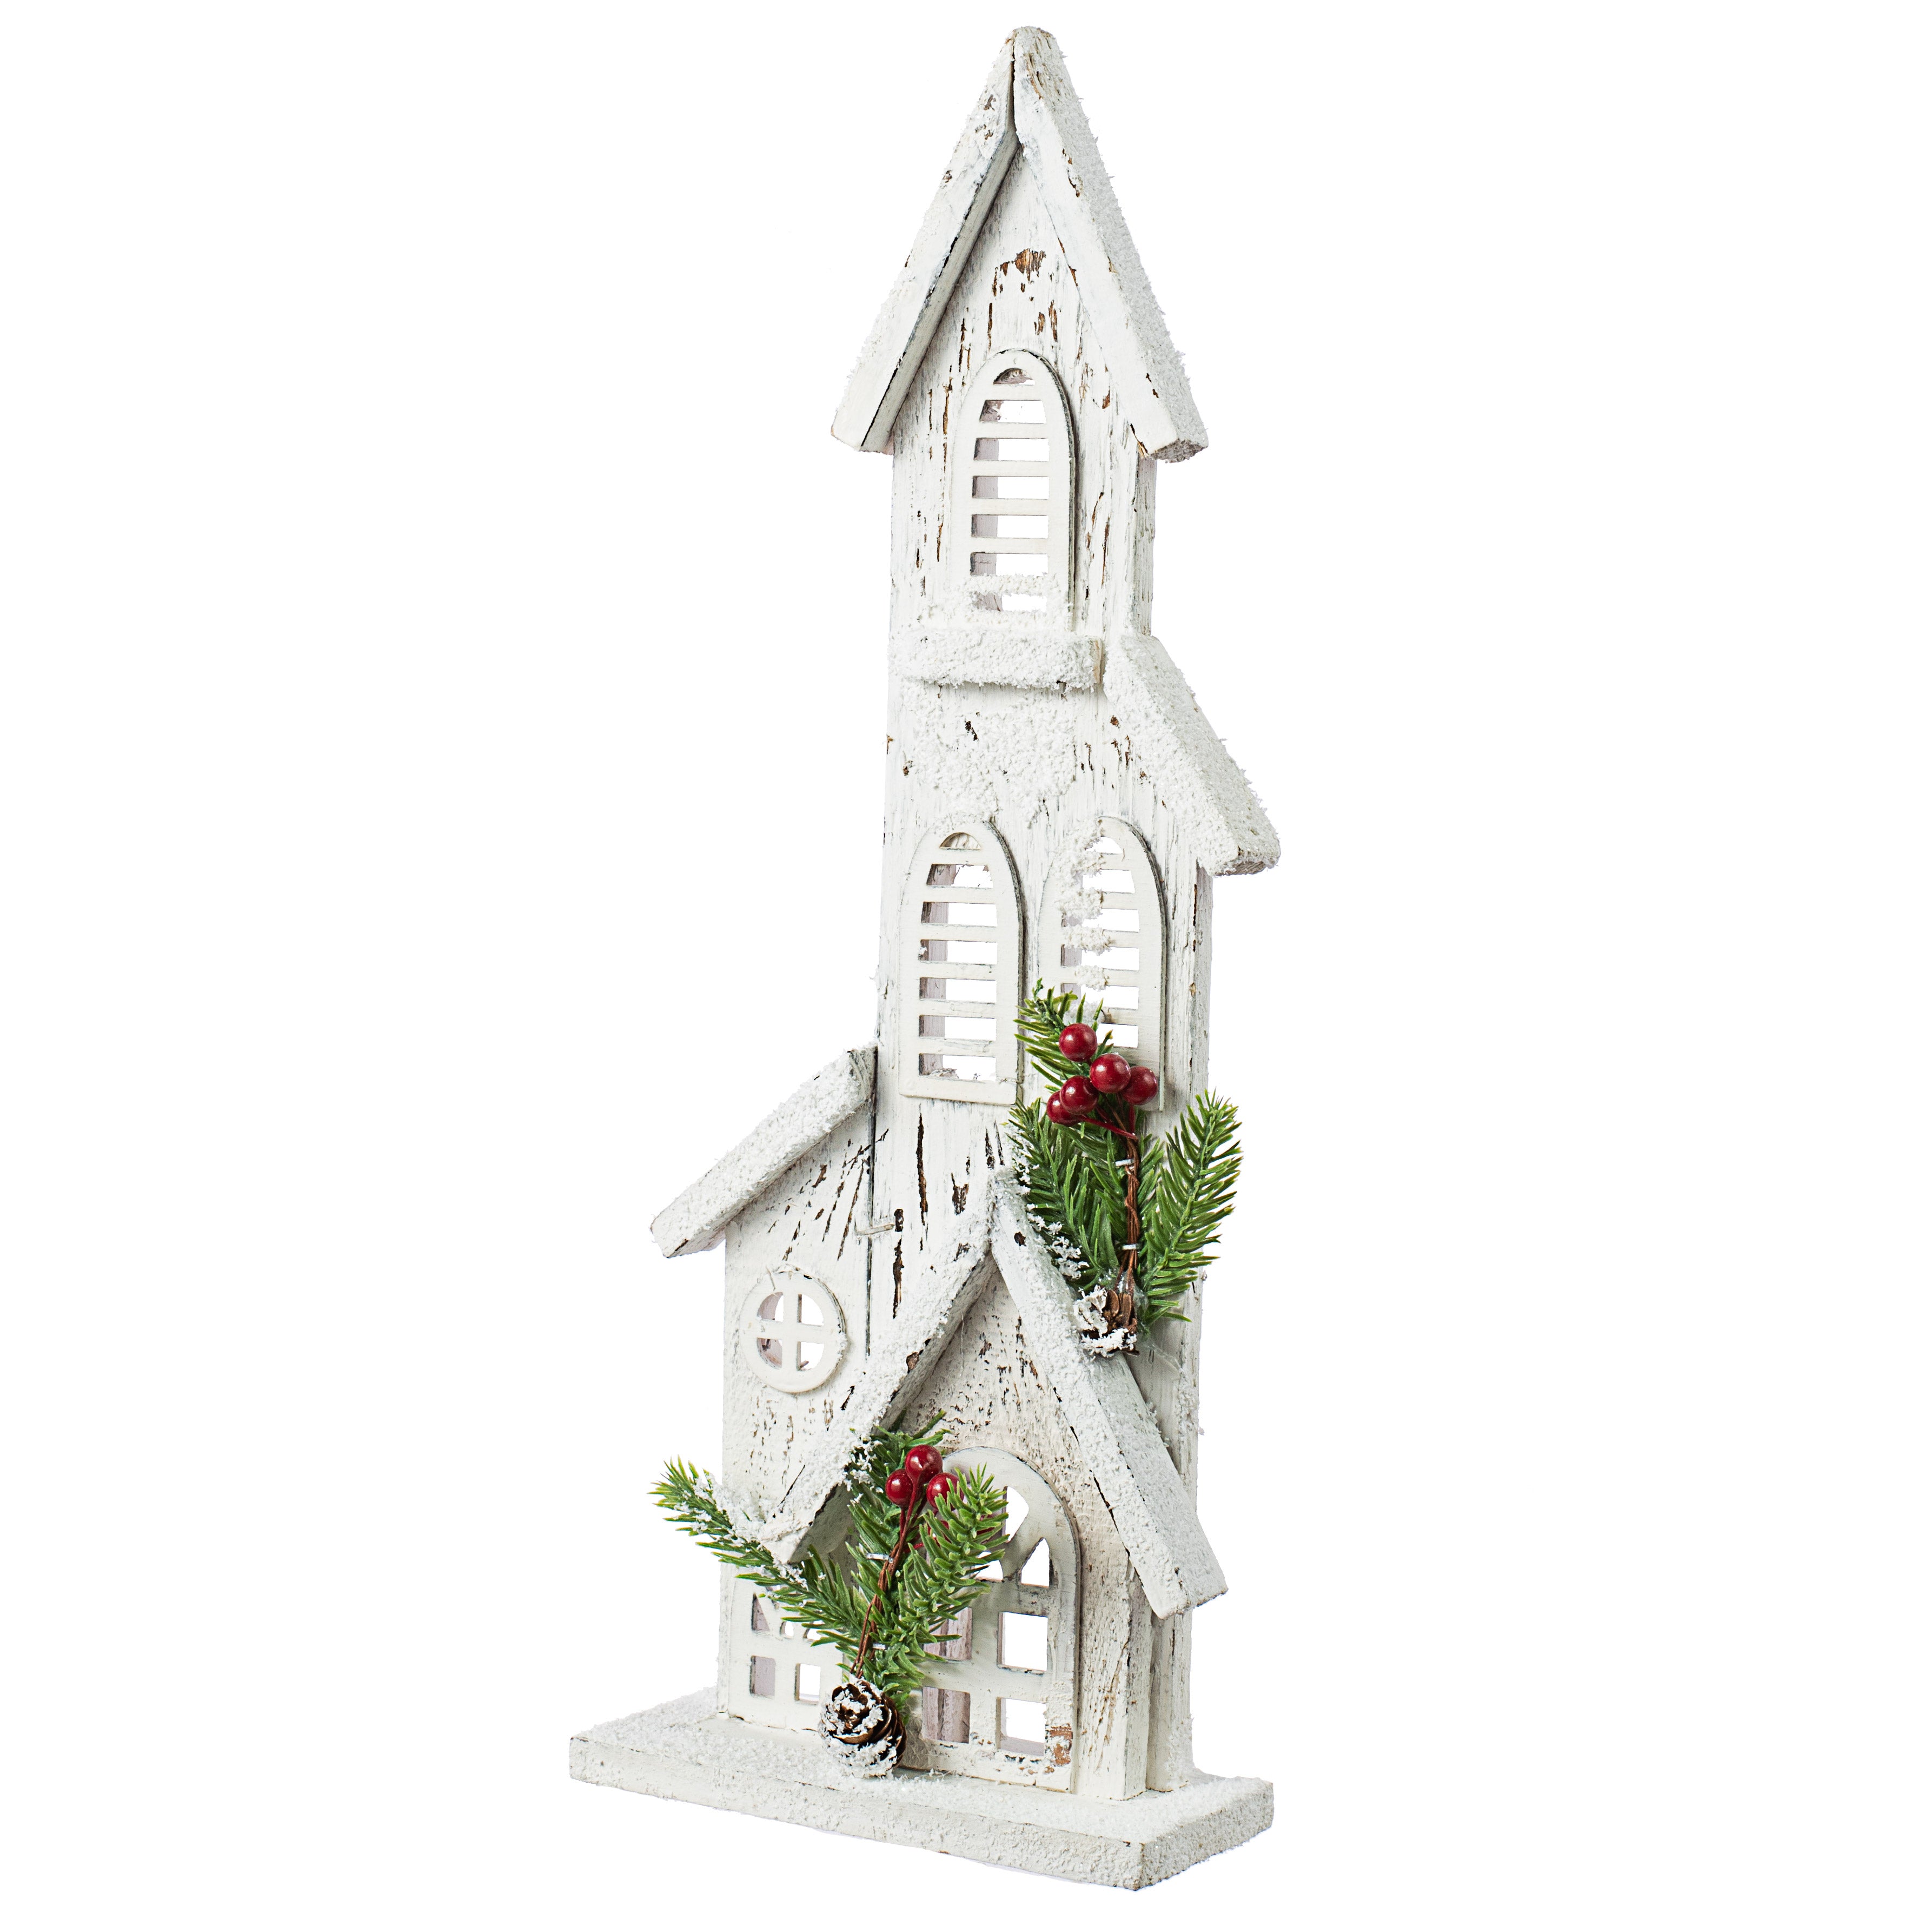 16" Wooden Winter House Decoration: White